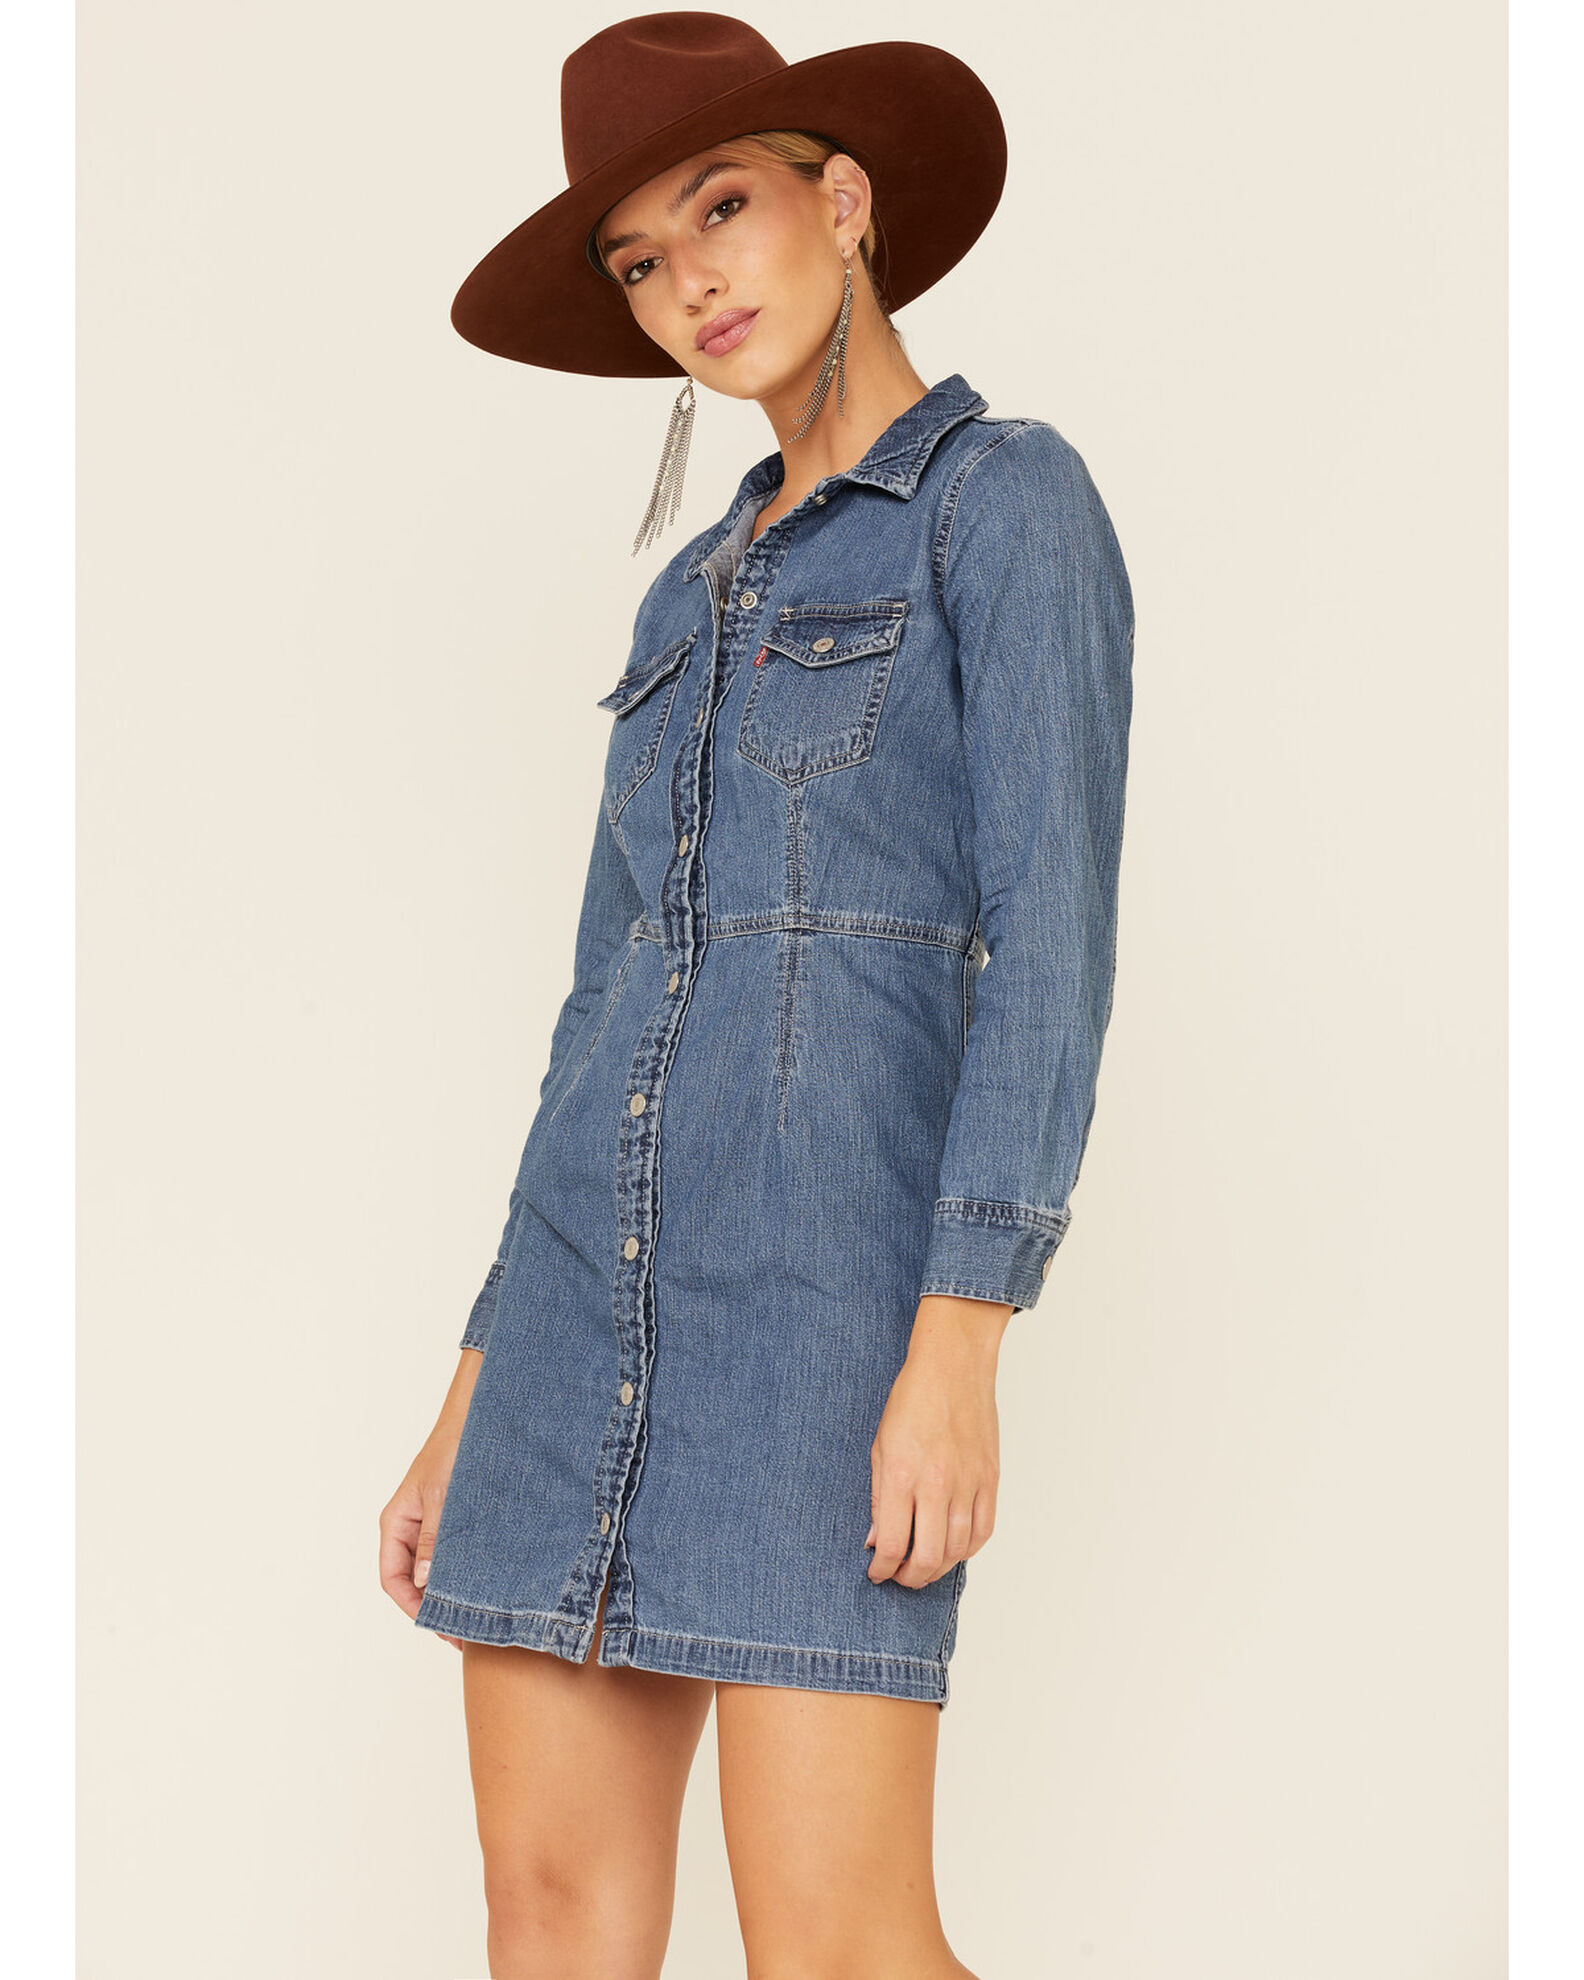 Levi's Women's Denim Ellie Dress - Country Outfitter